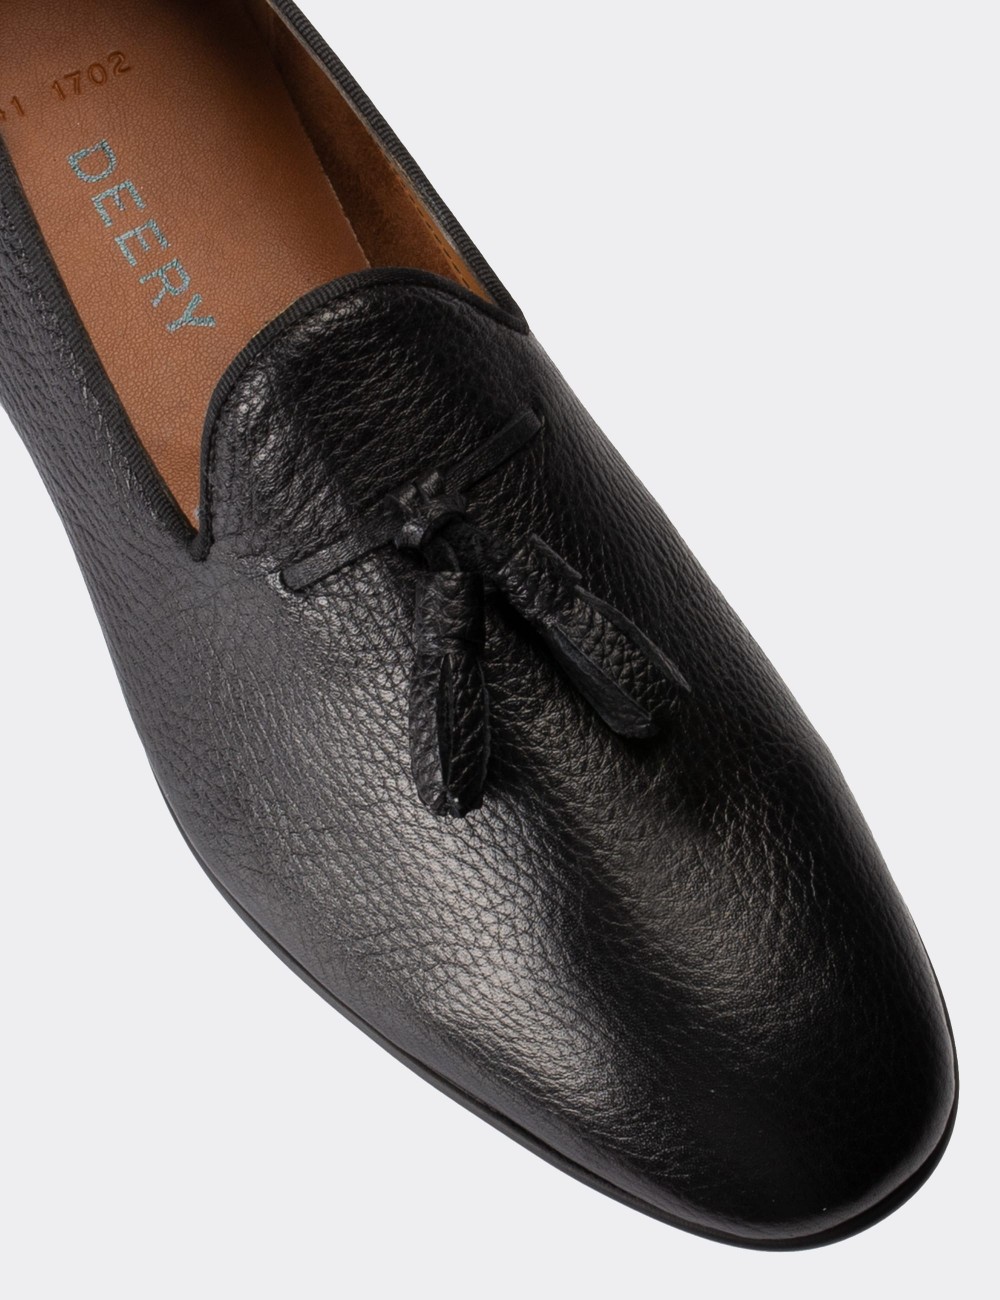 Black  Leather Loafers Shoes - 01702MSYHC05